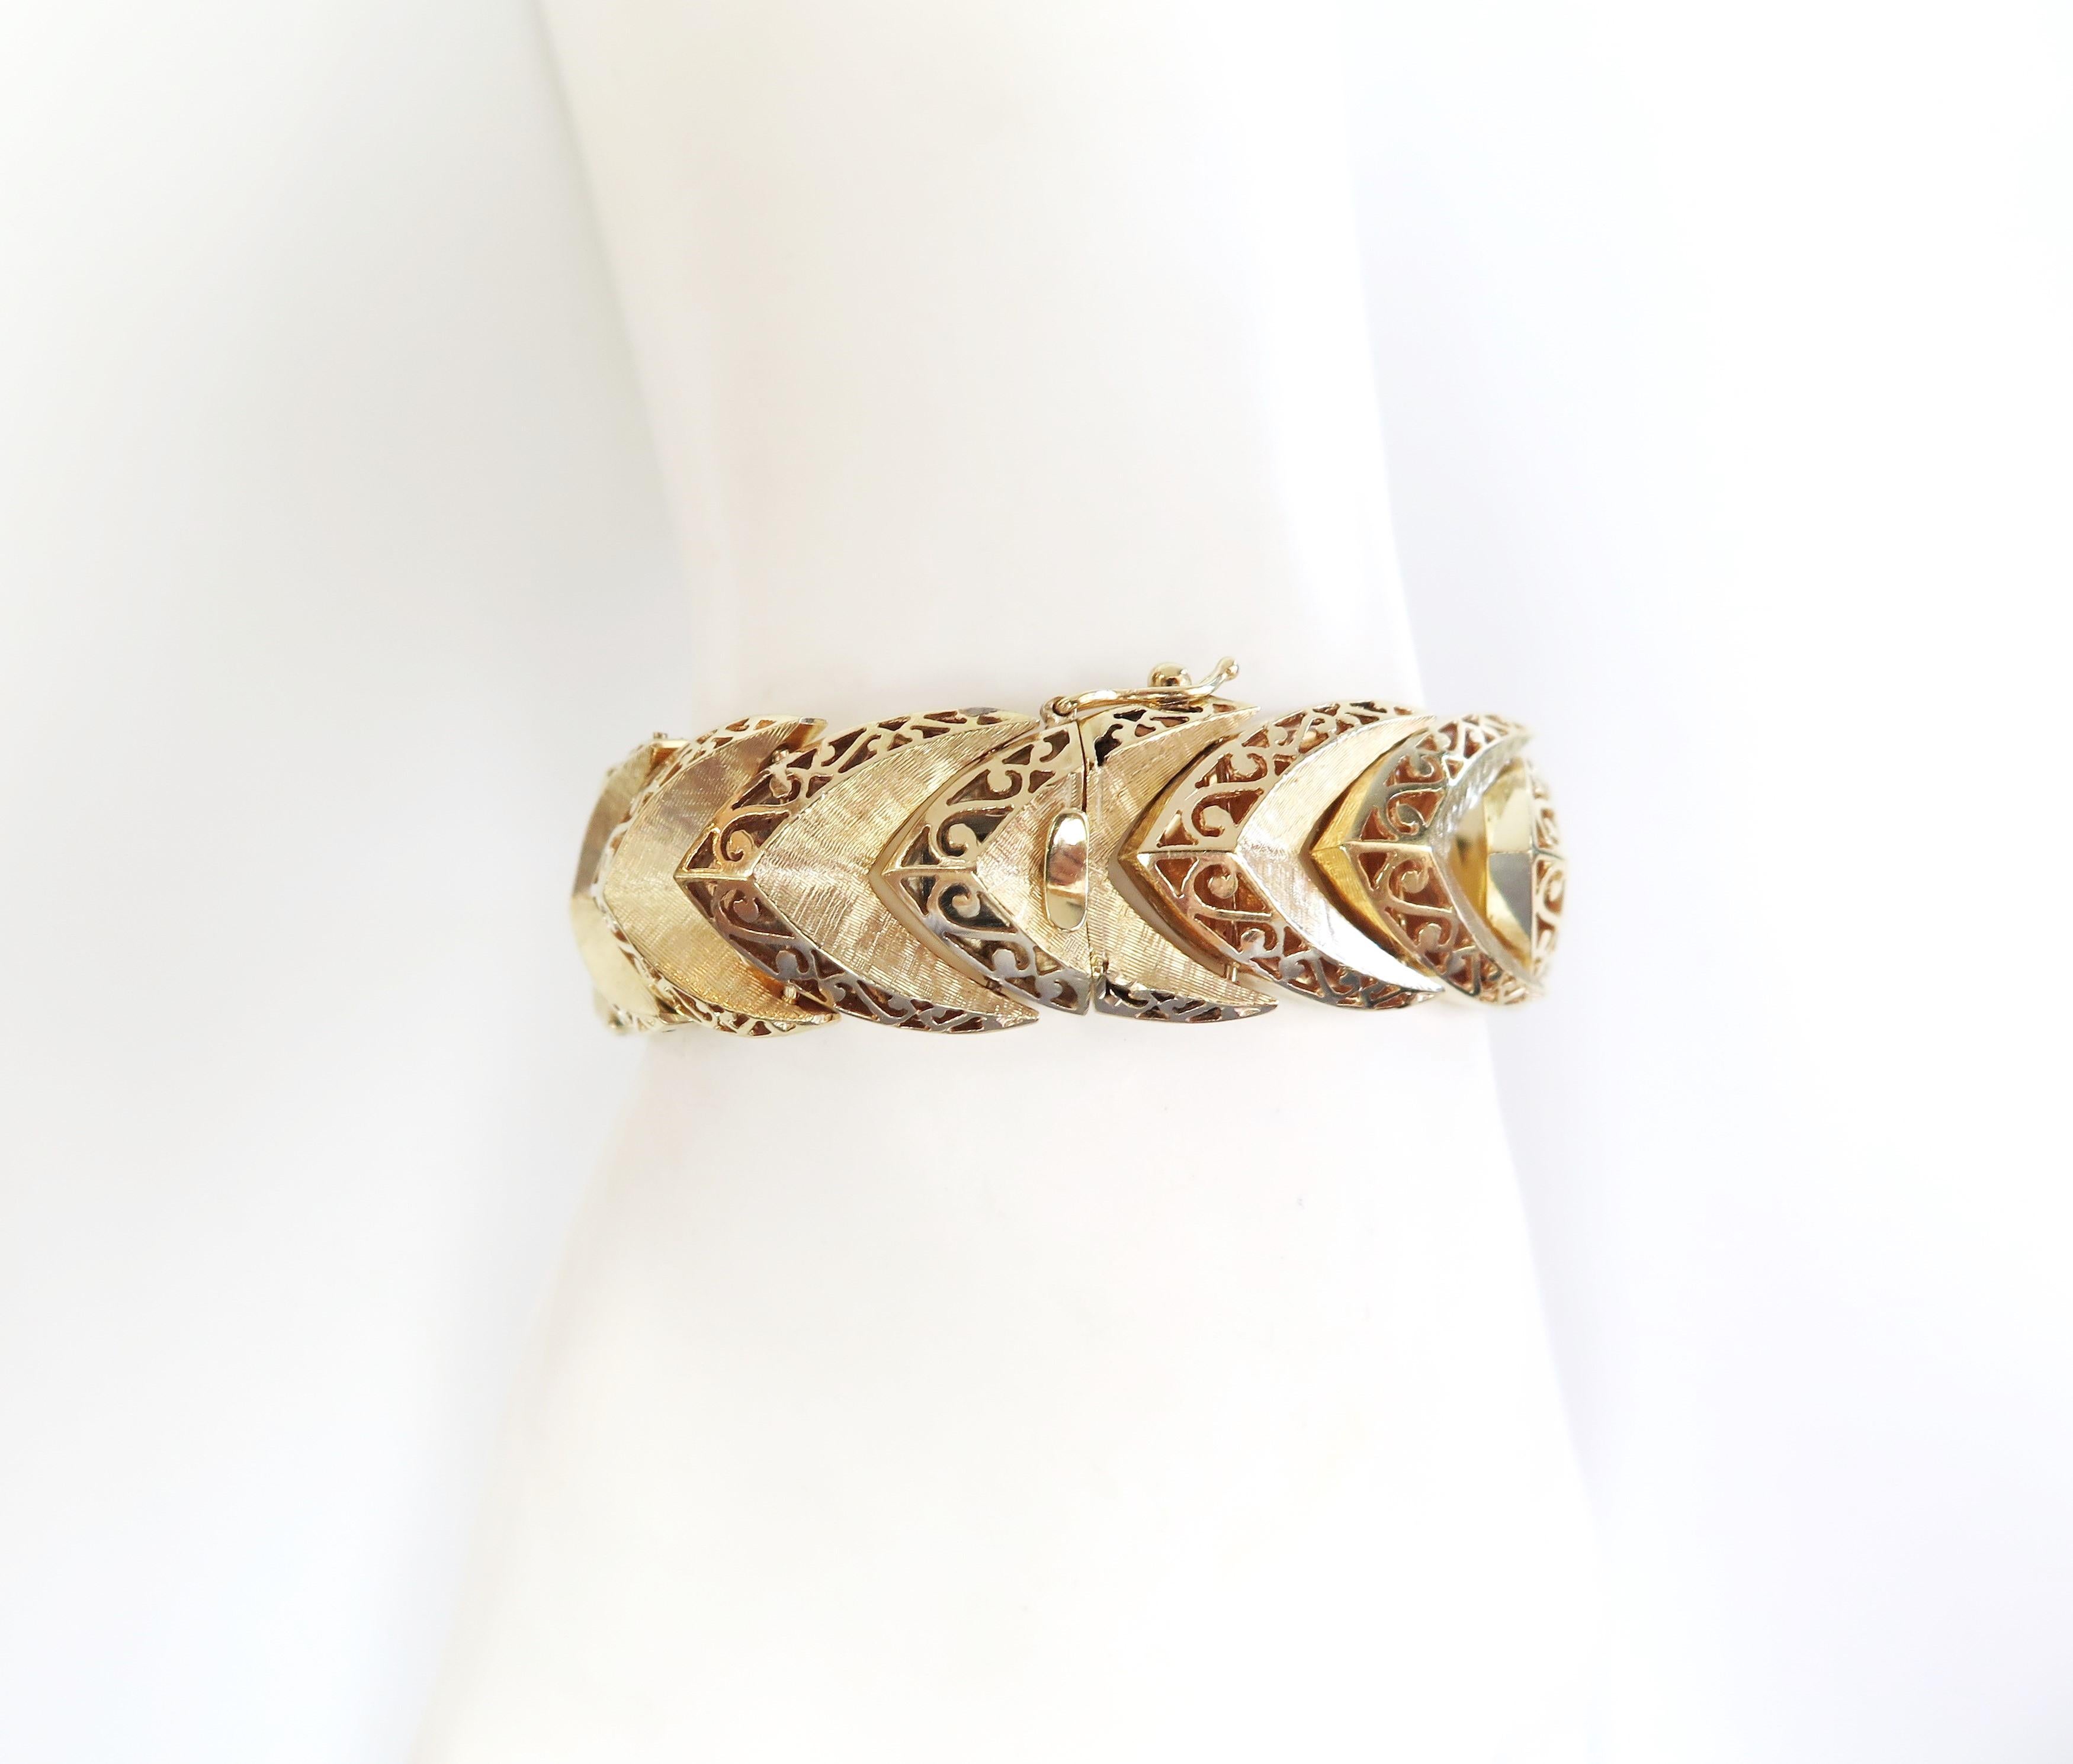 Wide Bracelet with Chevron and Scroll Design, 14 Karat Yellow Gold 3